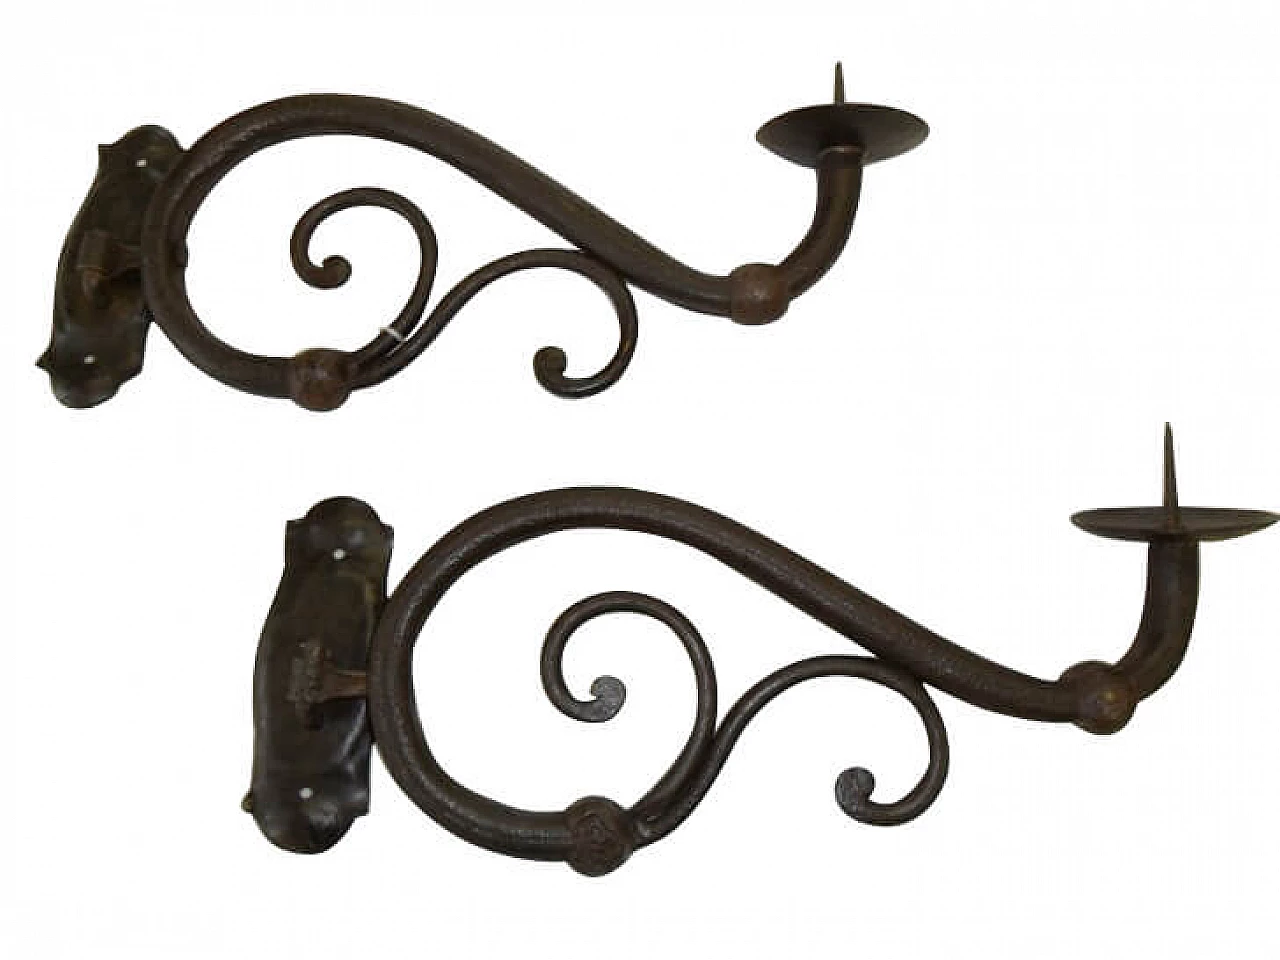 Mobile iron wall sconces with cast iron decoration 1089035